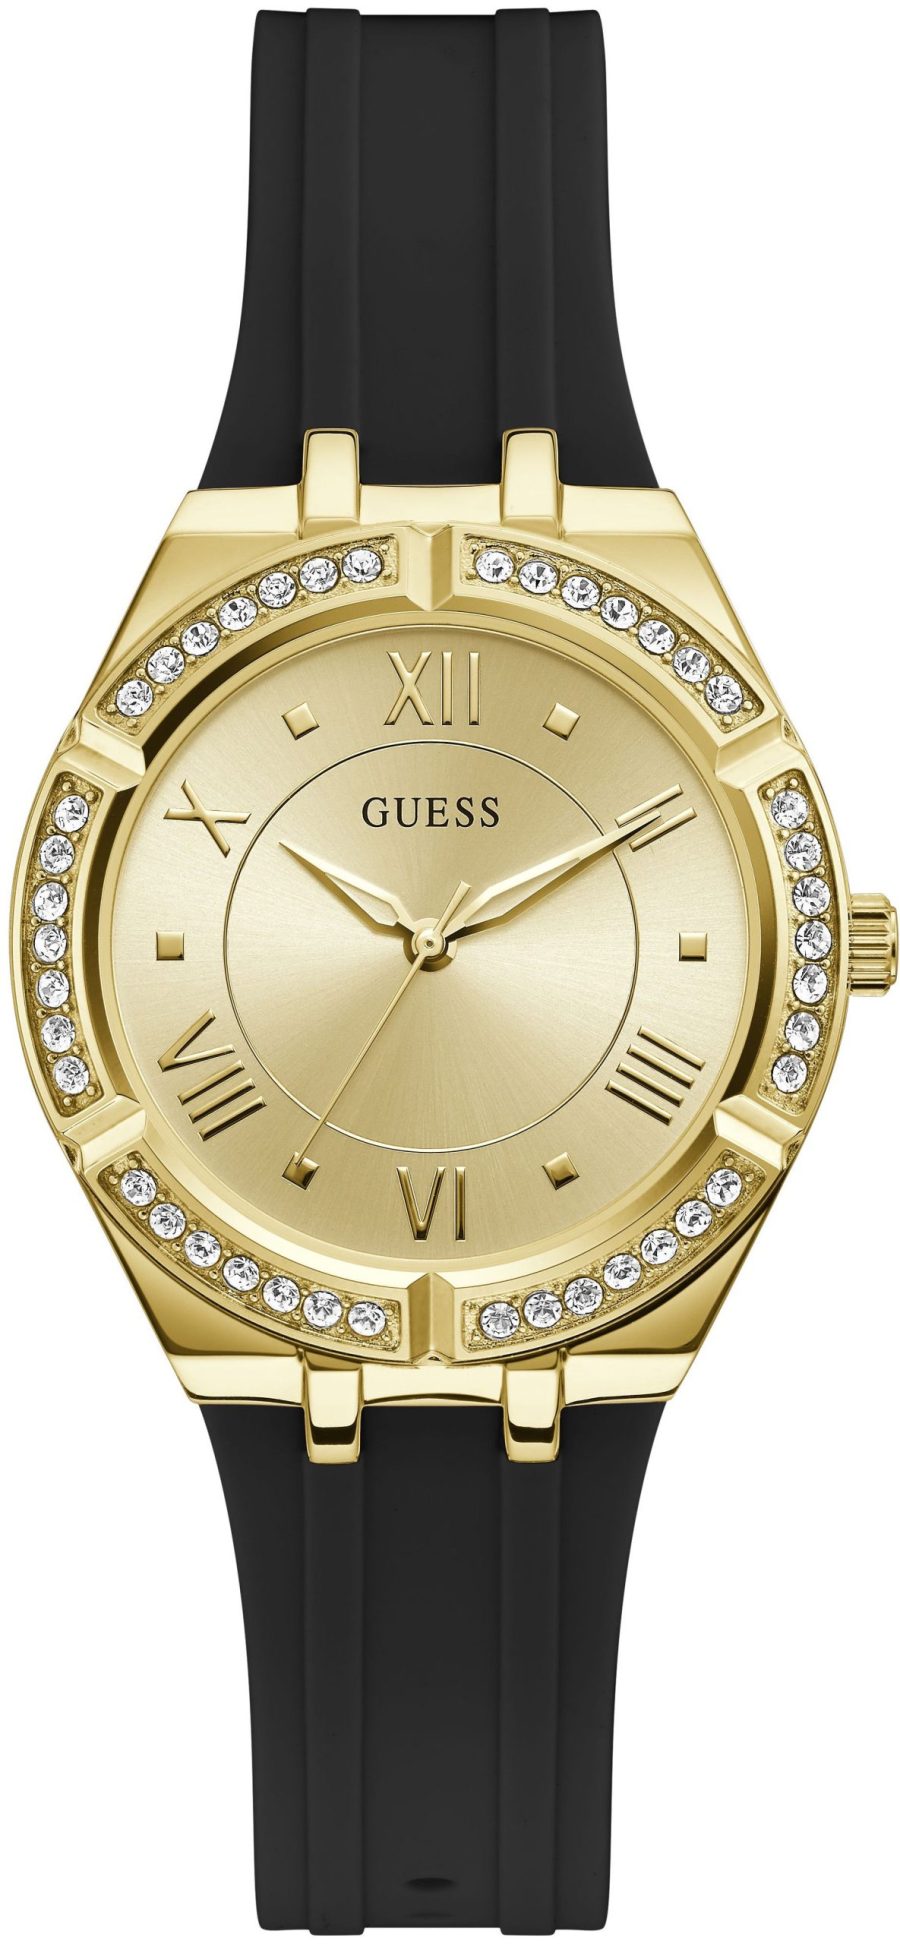 Hodinky GUESS model COSMO GW0034L1